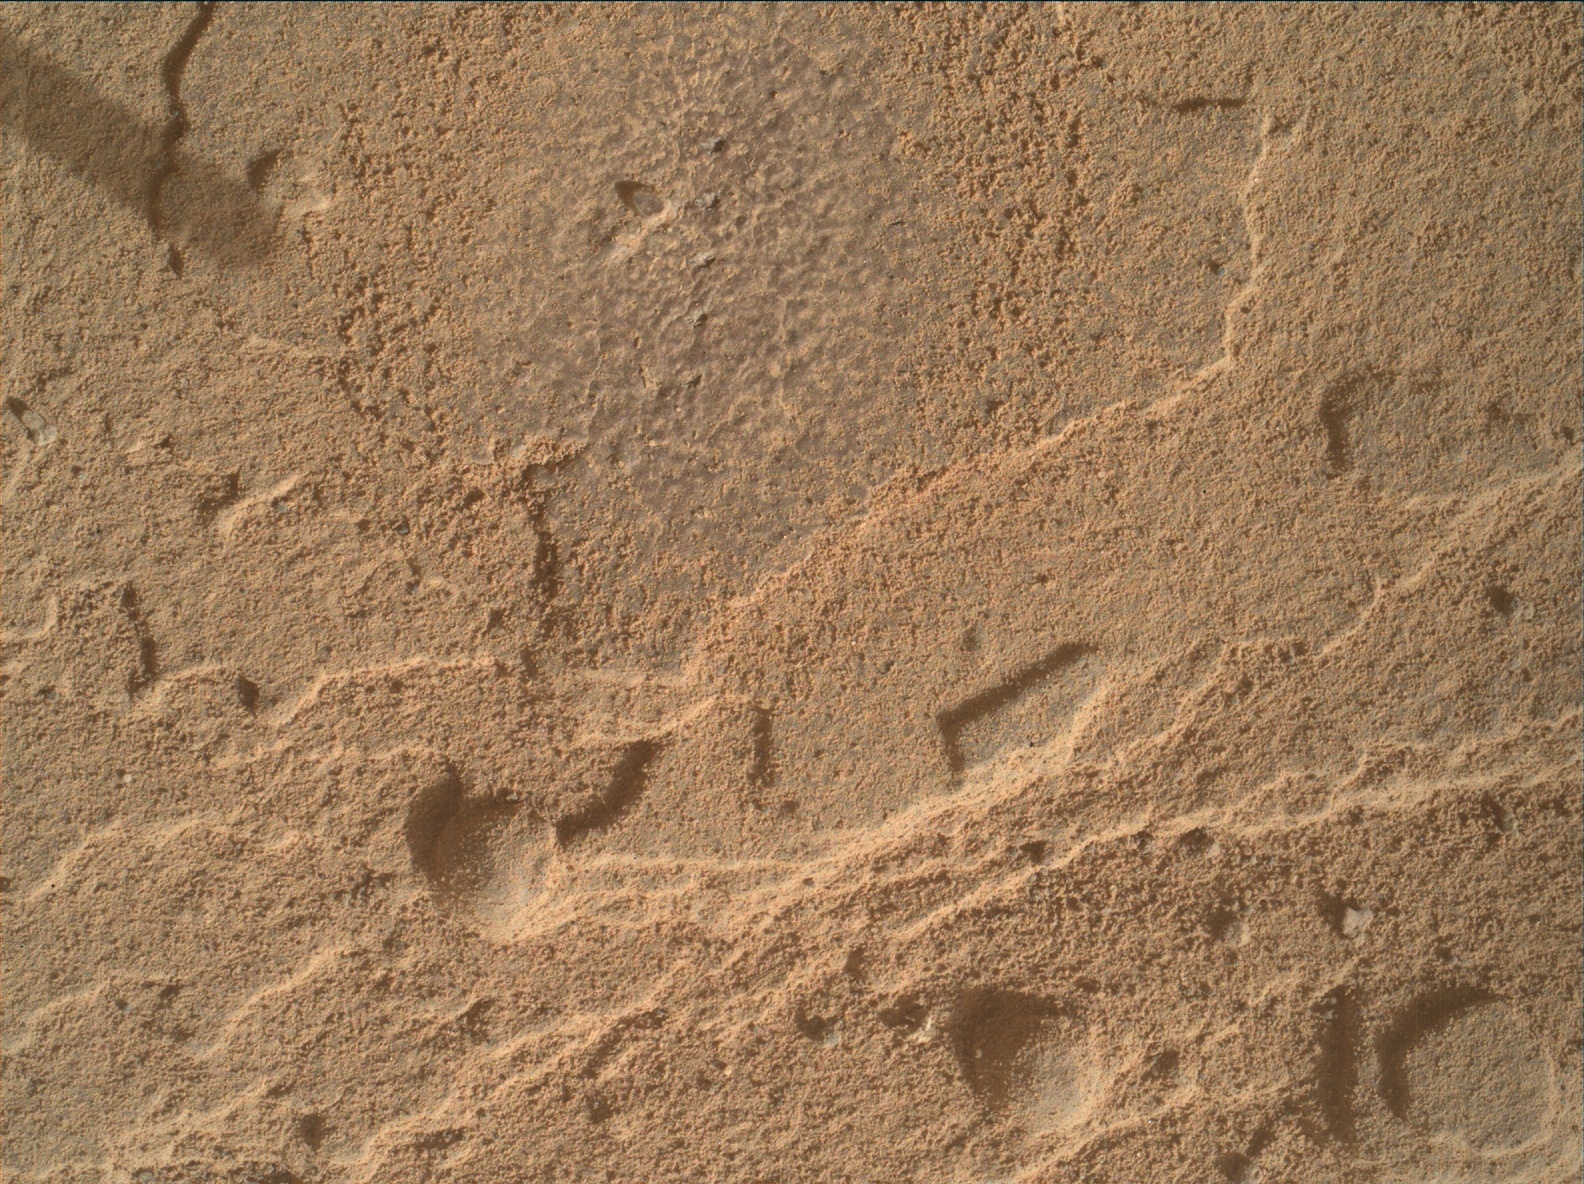 Nasa's Mars rover Curiosity acquired this image using its Mars Hand Lens Imager (MAHLI) on Sol 3603